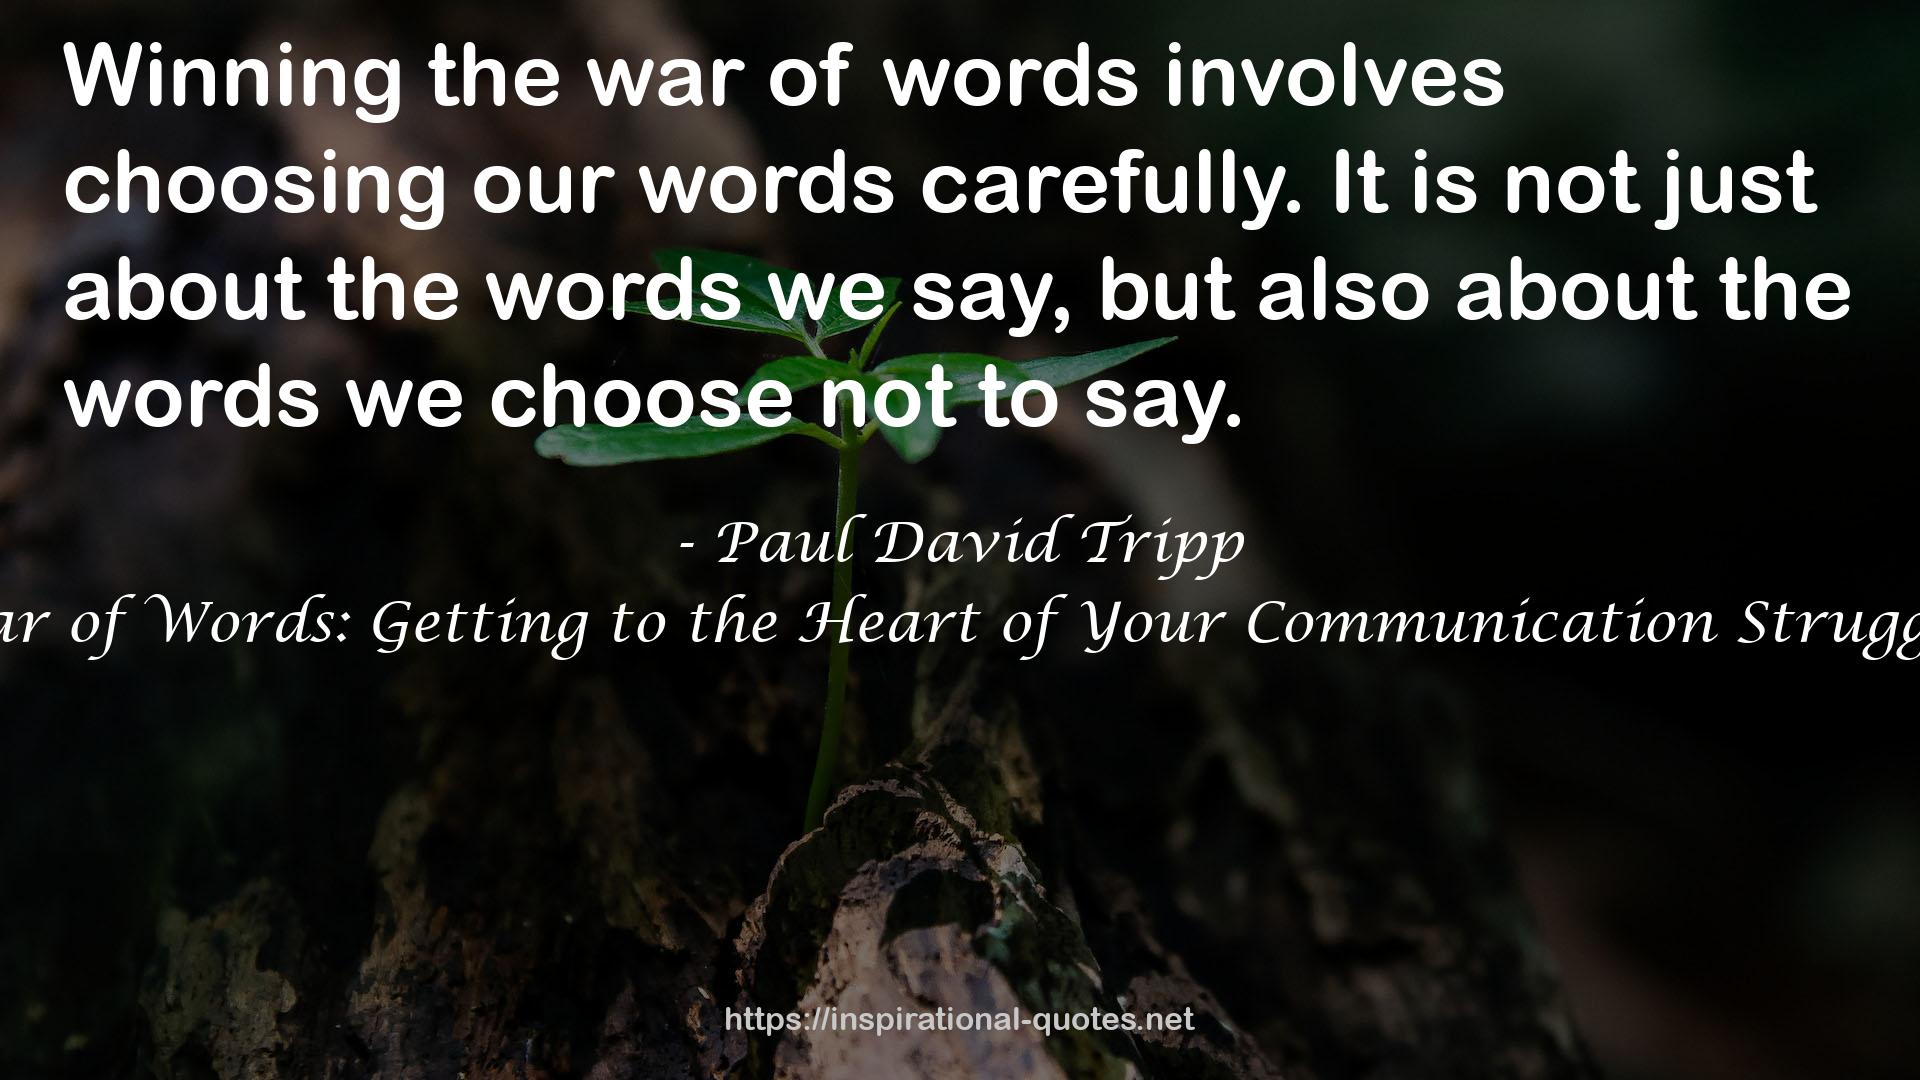 War of Words: Getting to the Heart of Your Communication Struggles QUOTES